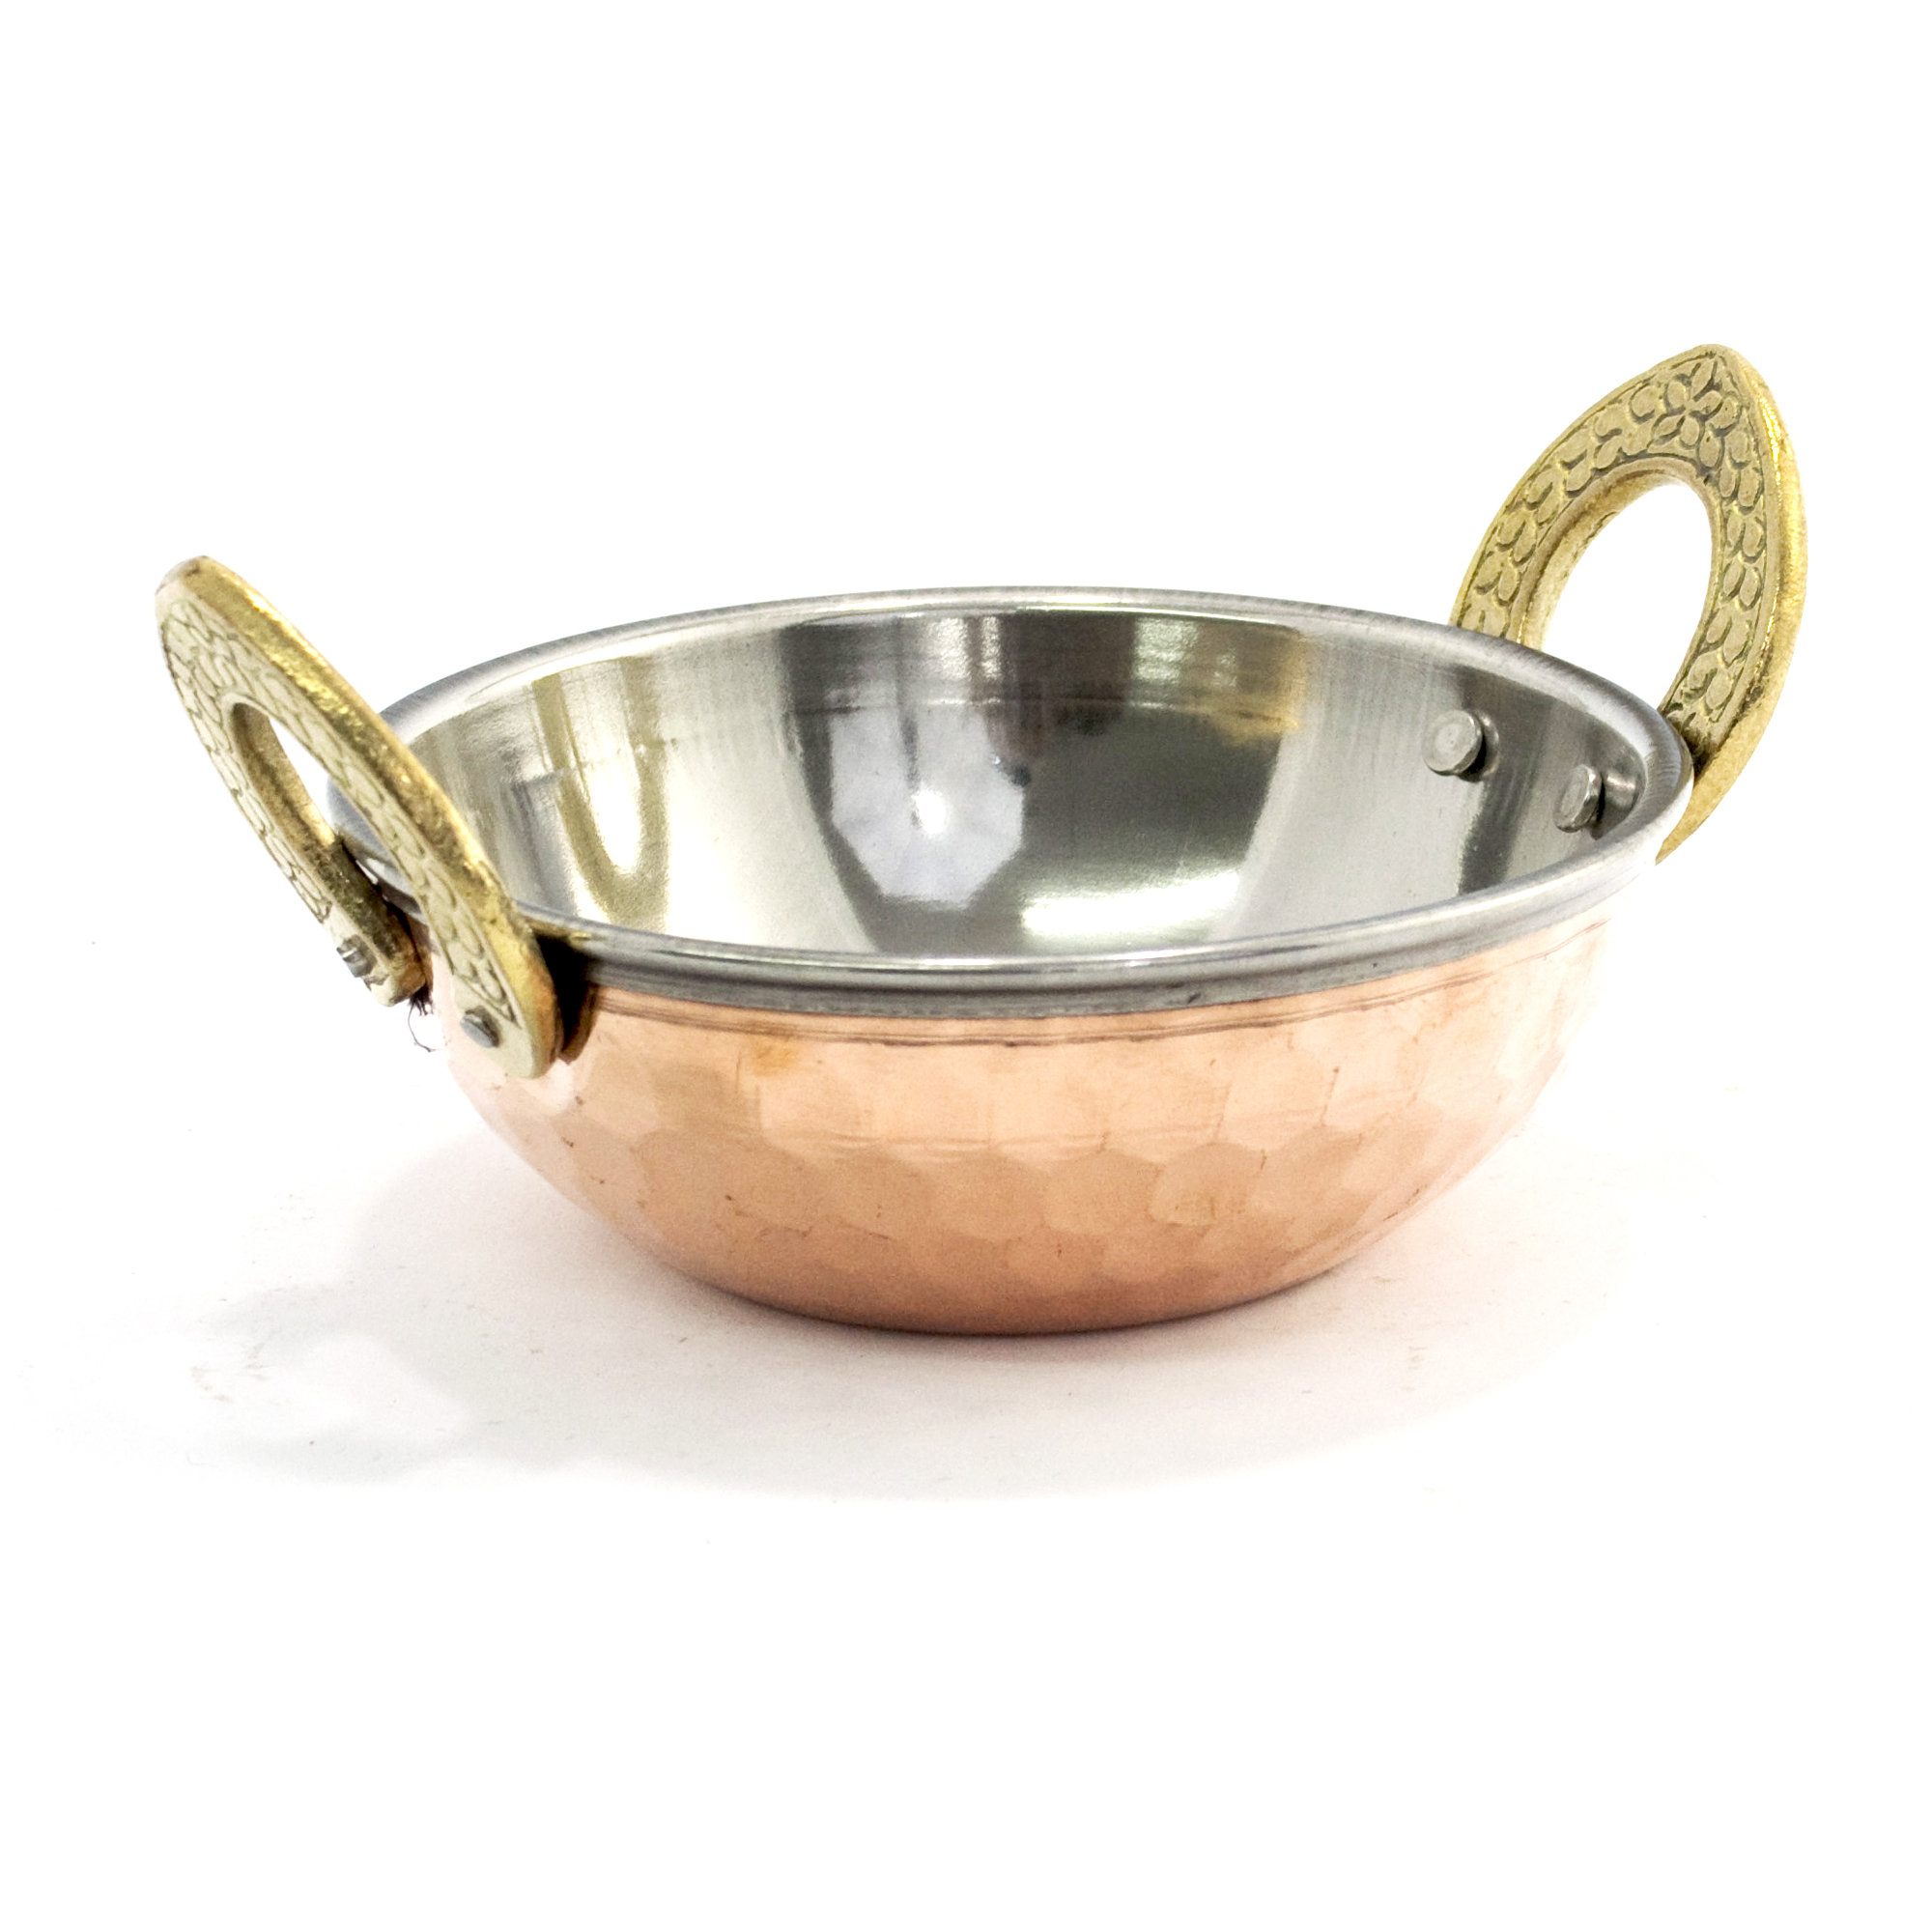 Hammered Kadai Copper Stainless Steel Serving Bowl Indian Dishes Set Of 2 Pcs 